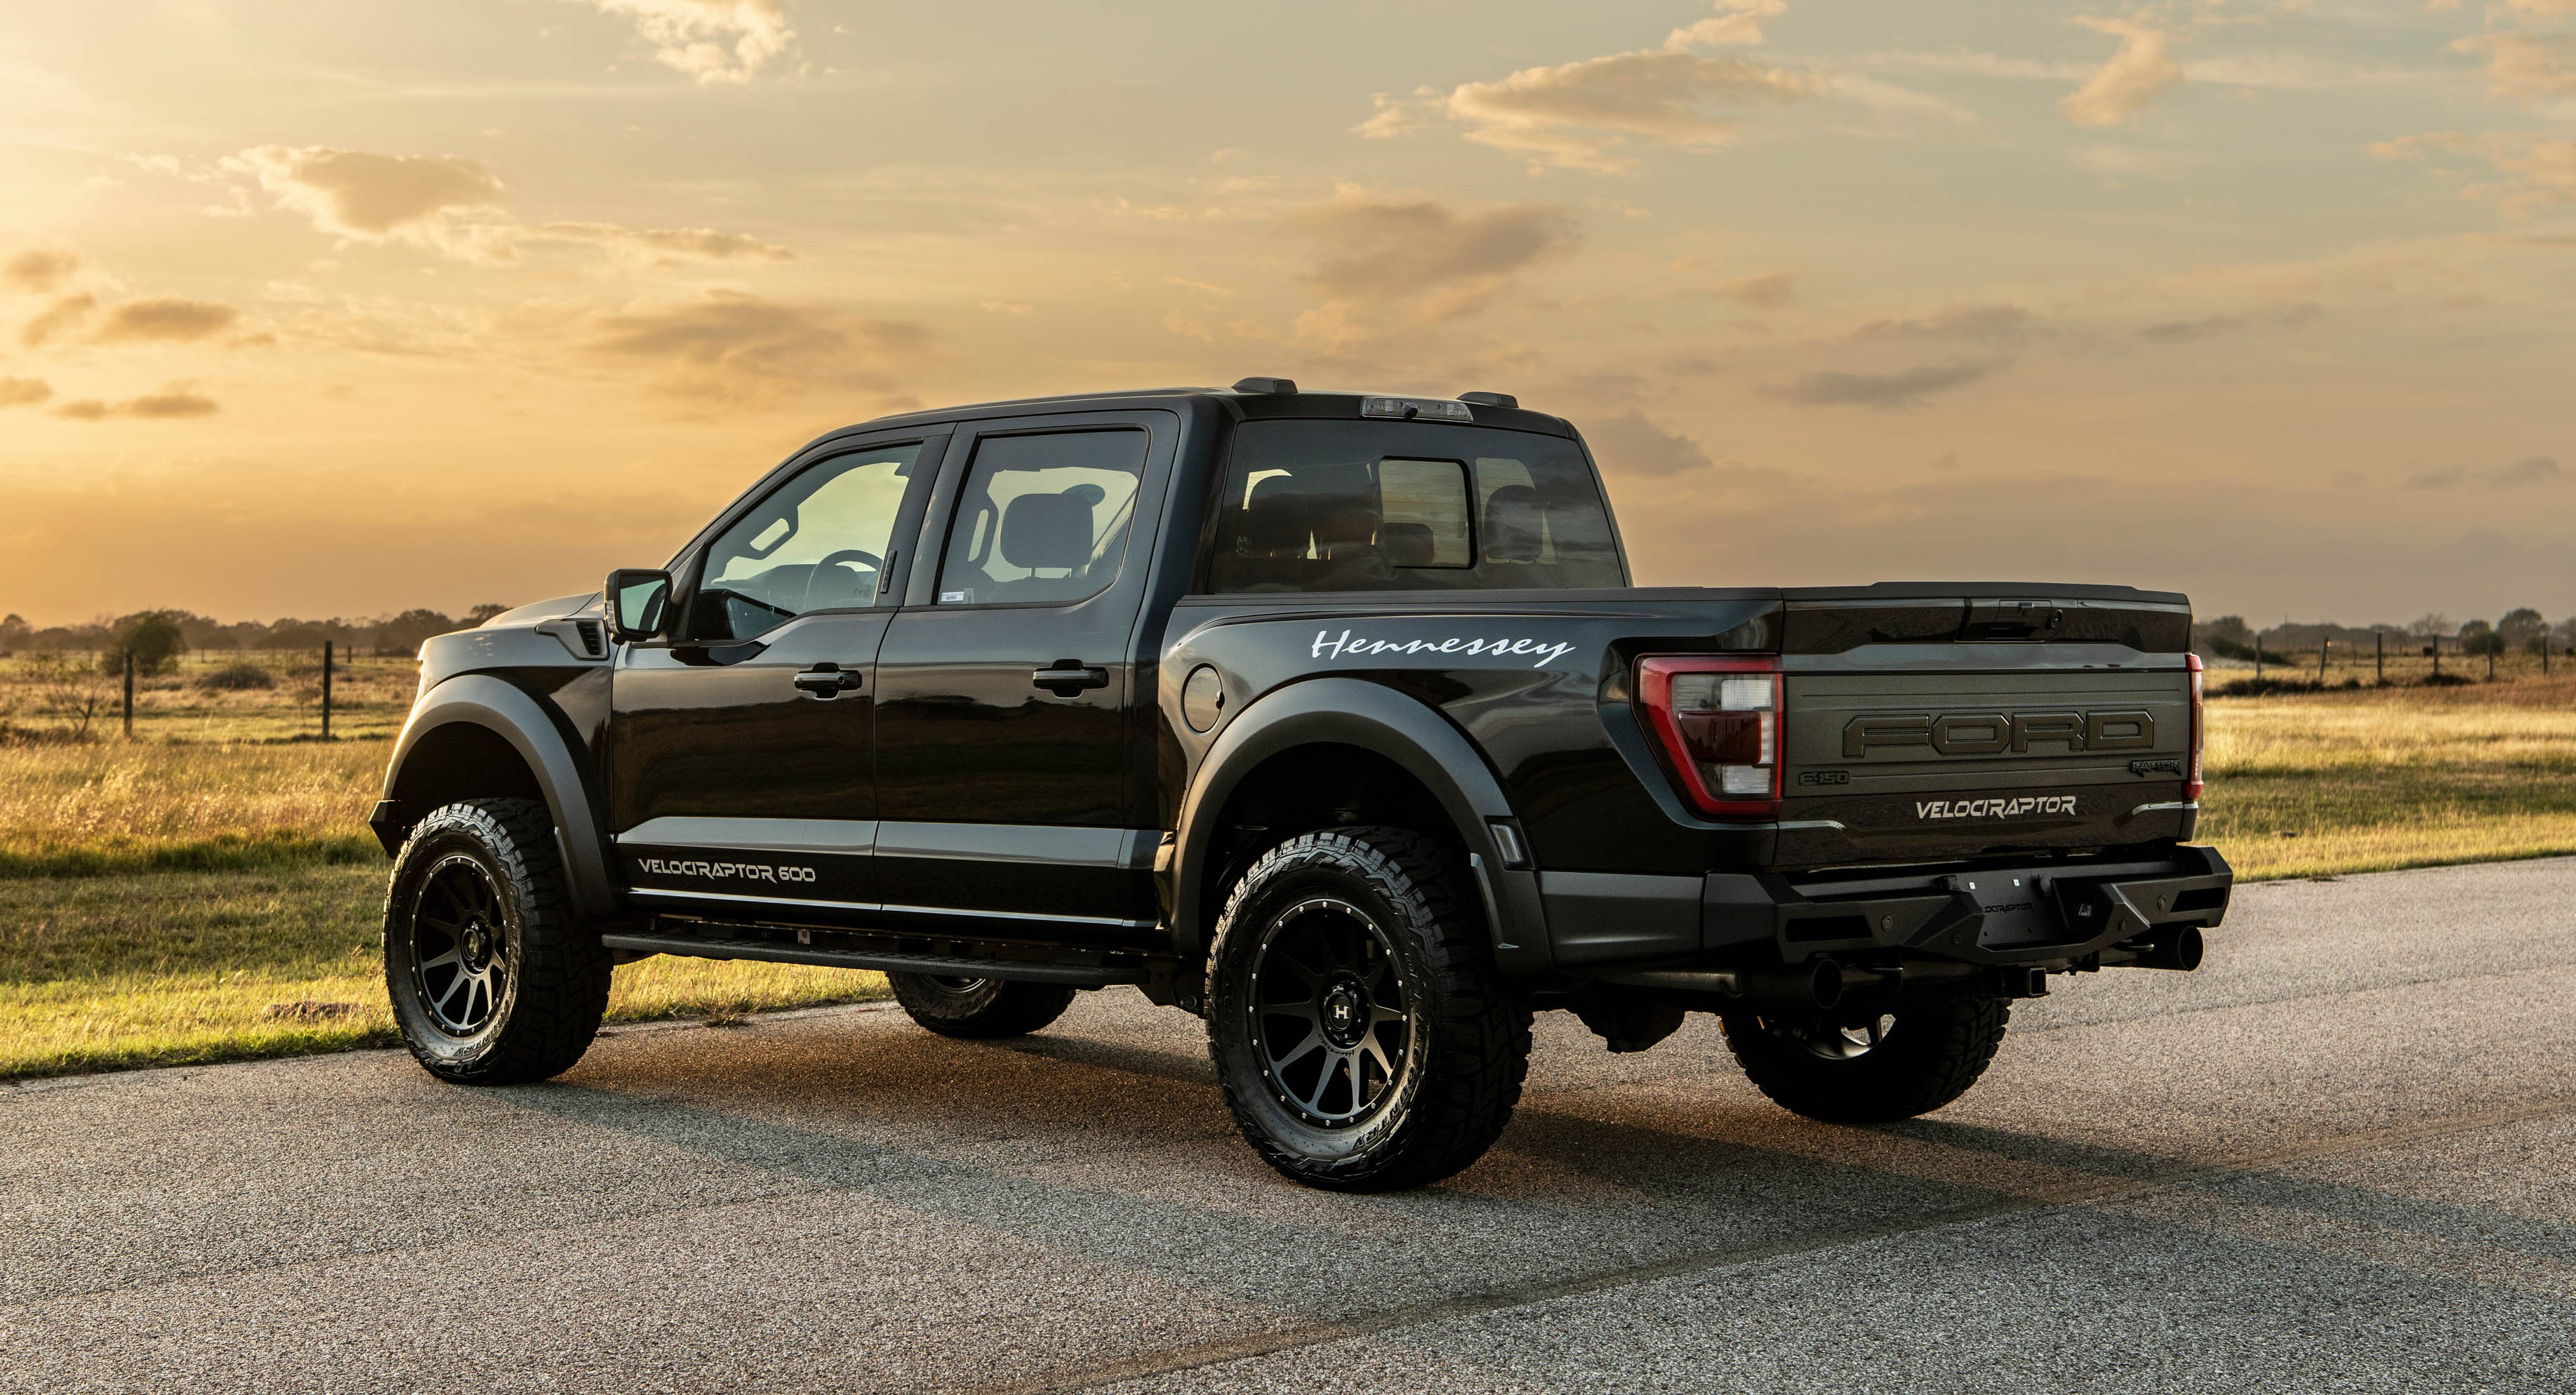 Think The F-150 Raptor Is Too Conservative? Then Check Out The